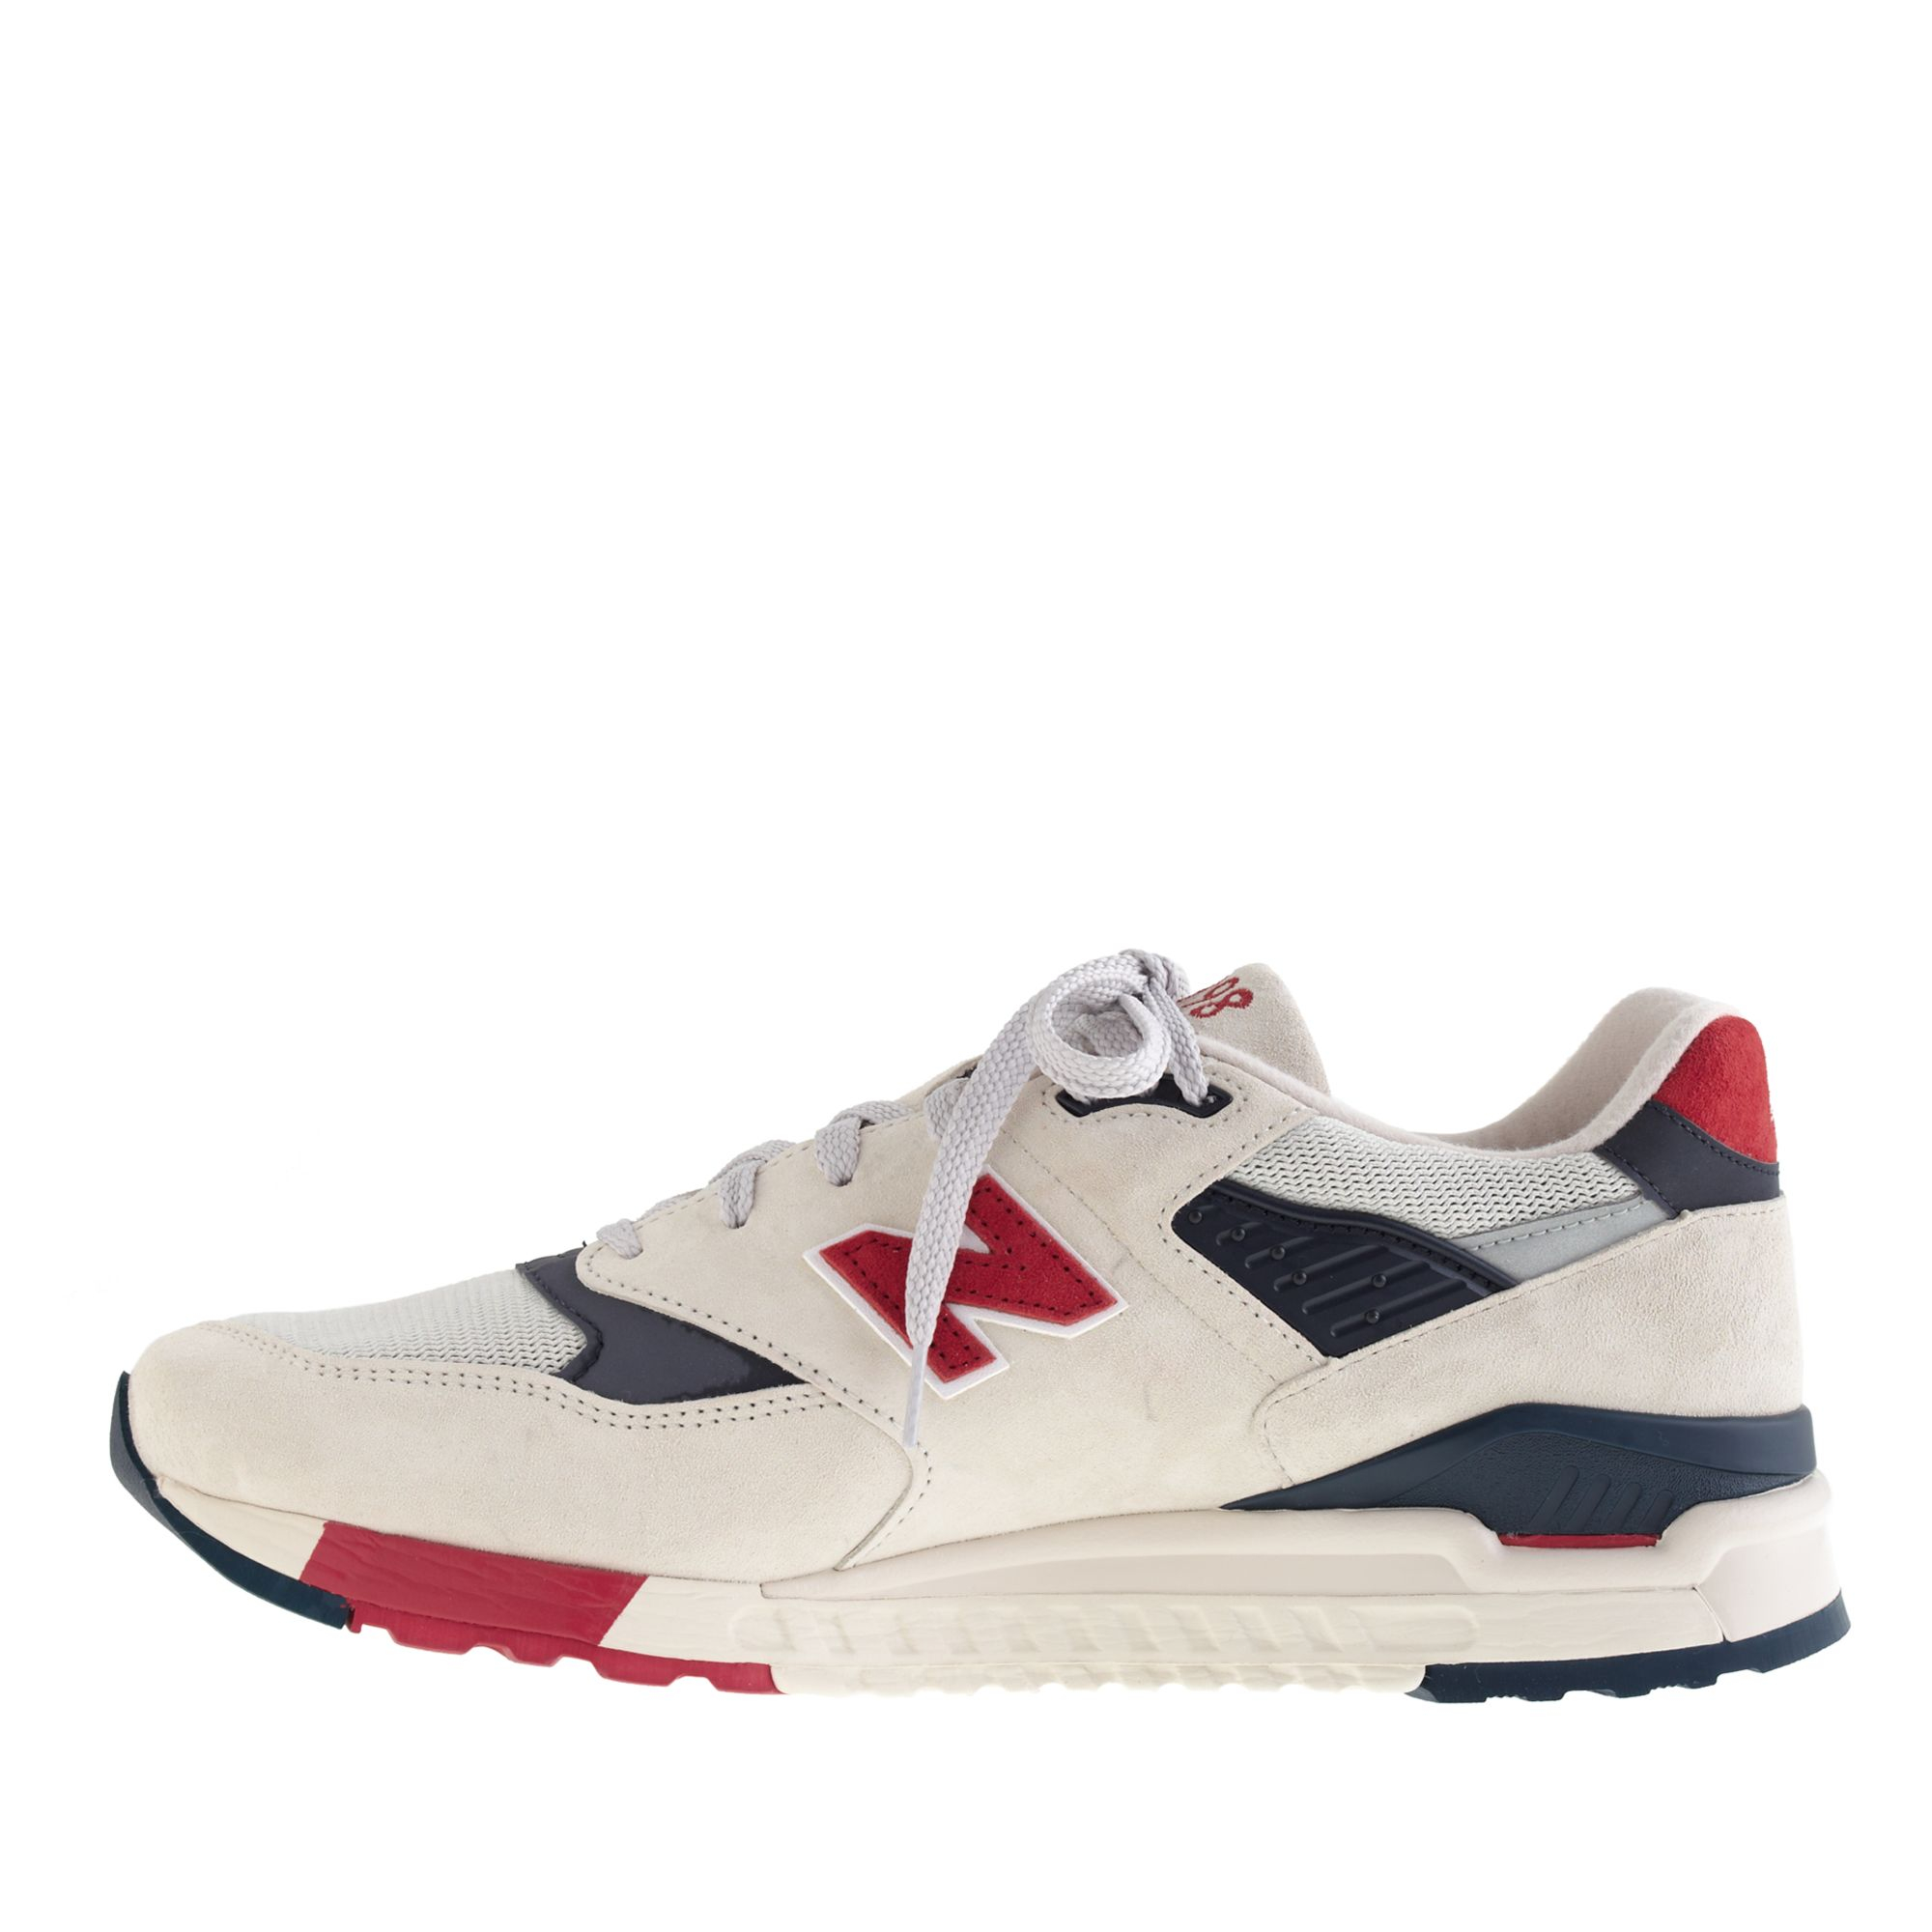 Lyst New Balance 998 Independence Day Sneakers in White